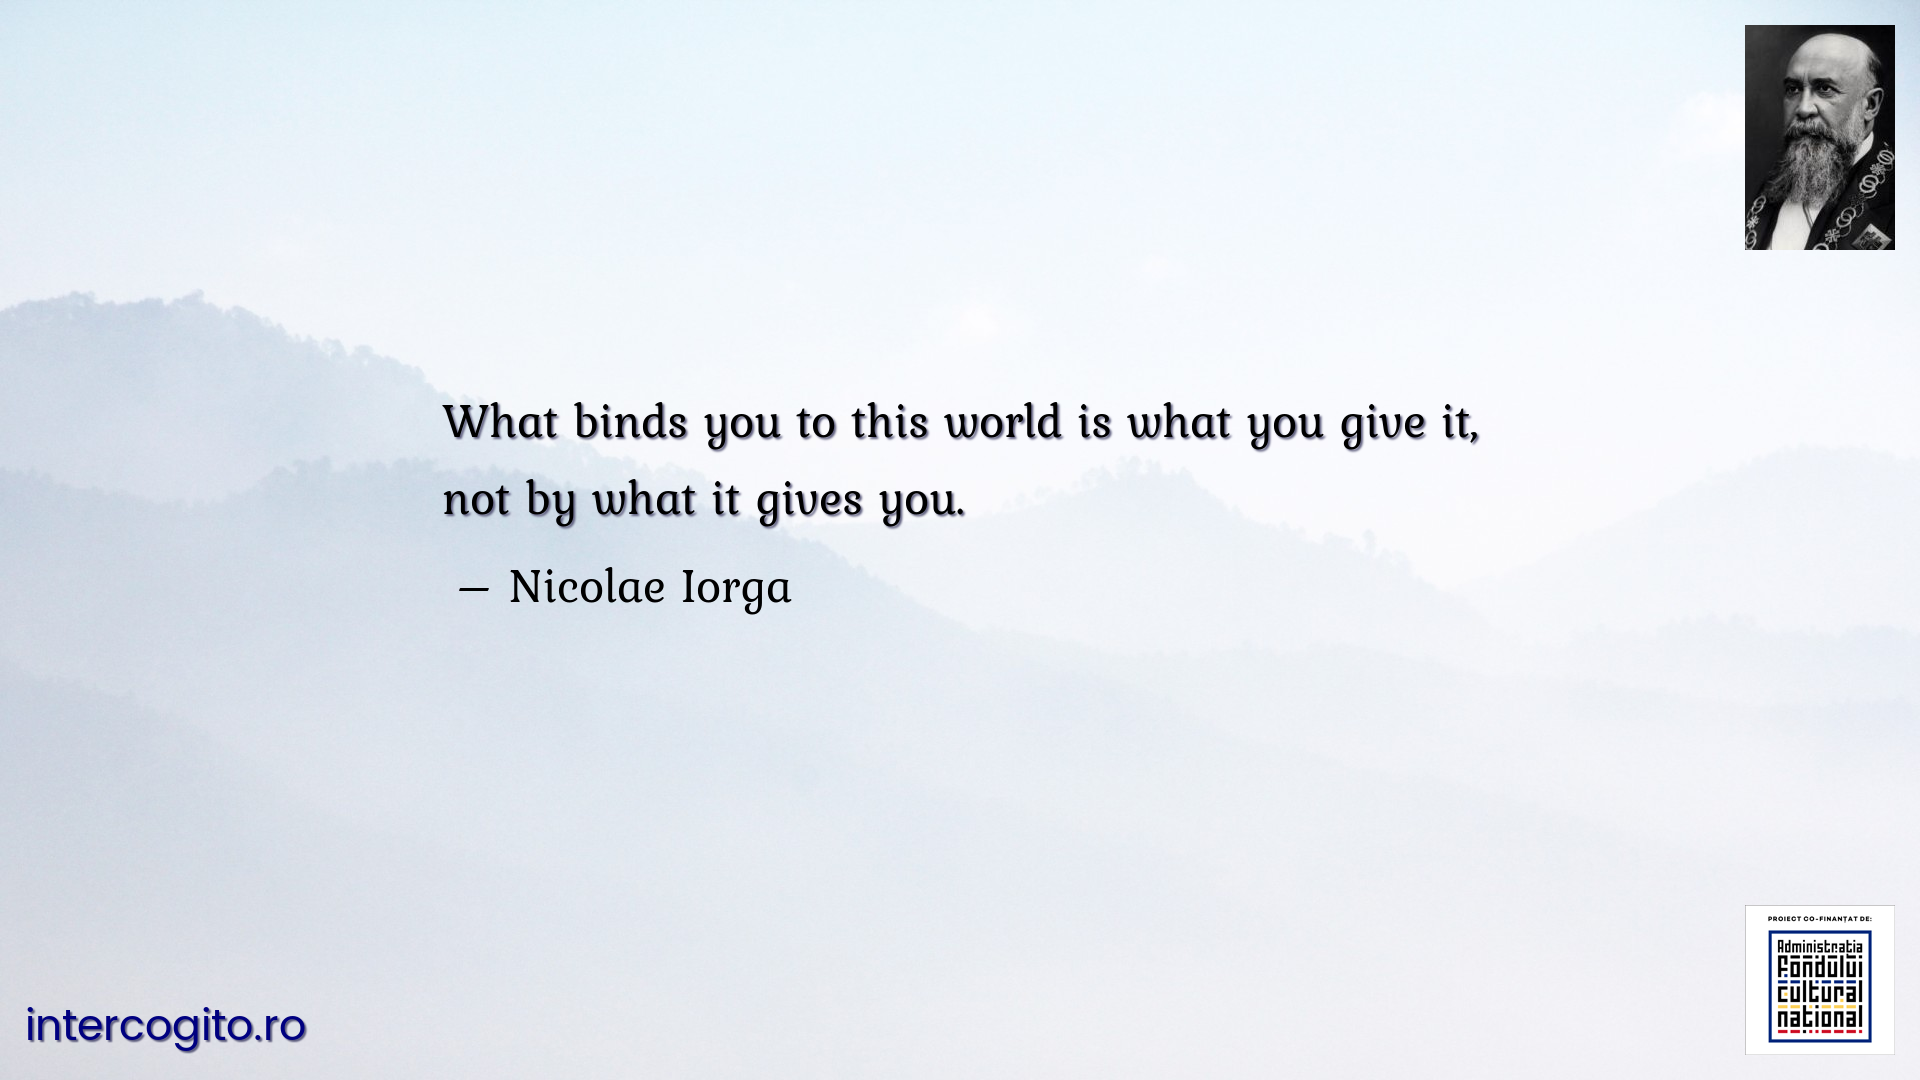 What binds you to this world is what you give it, not by what it gives you.